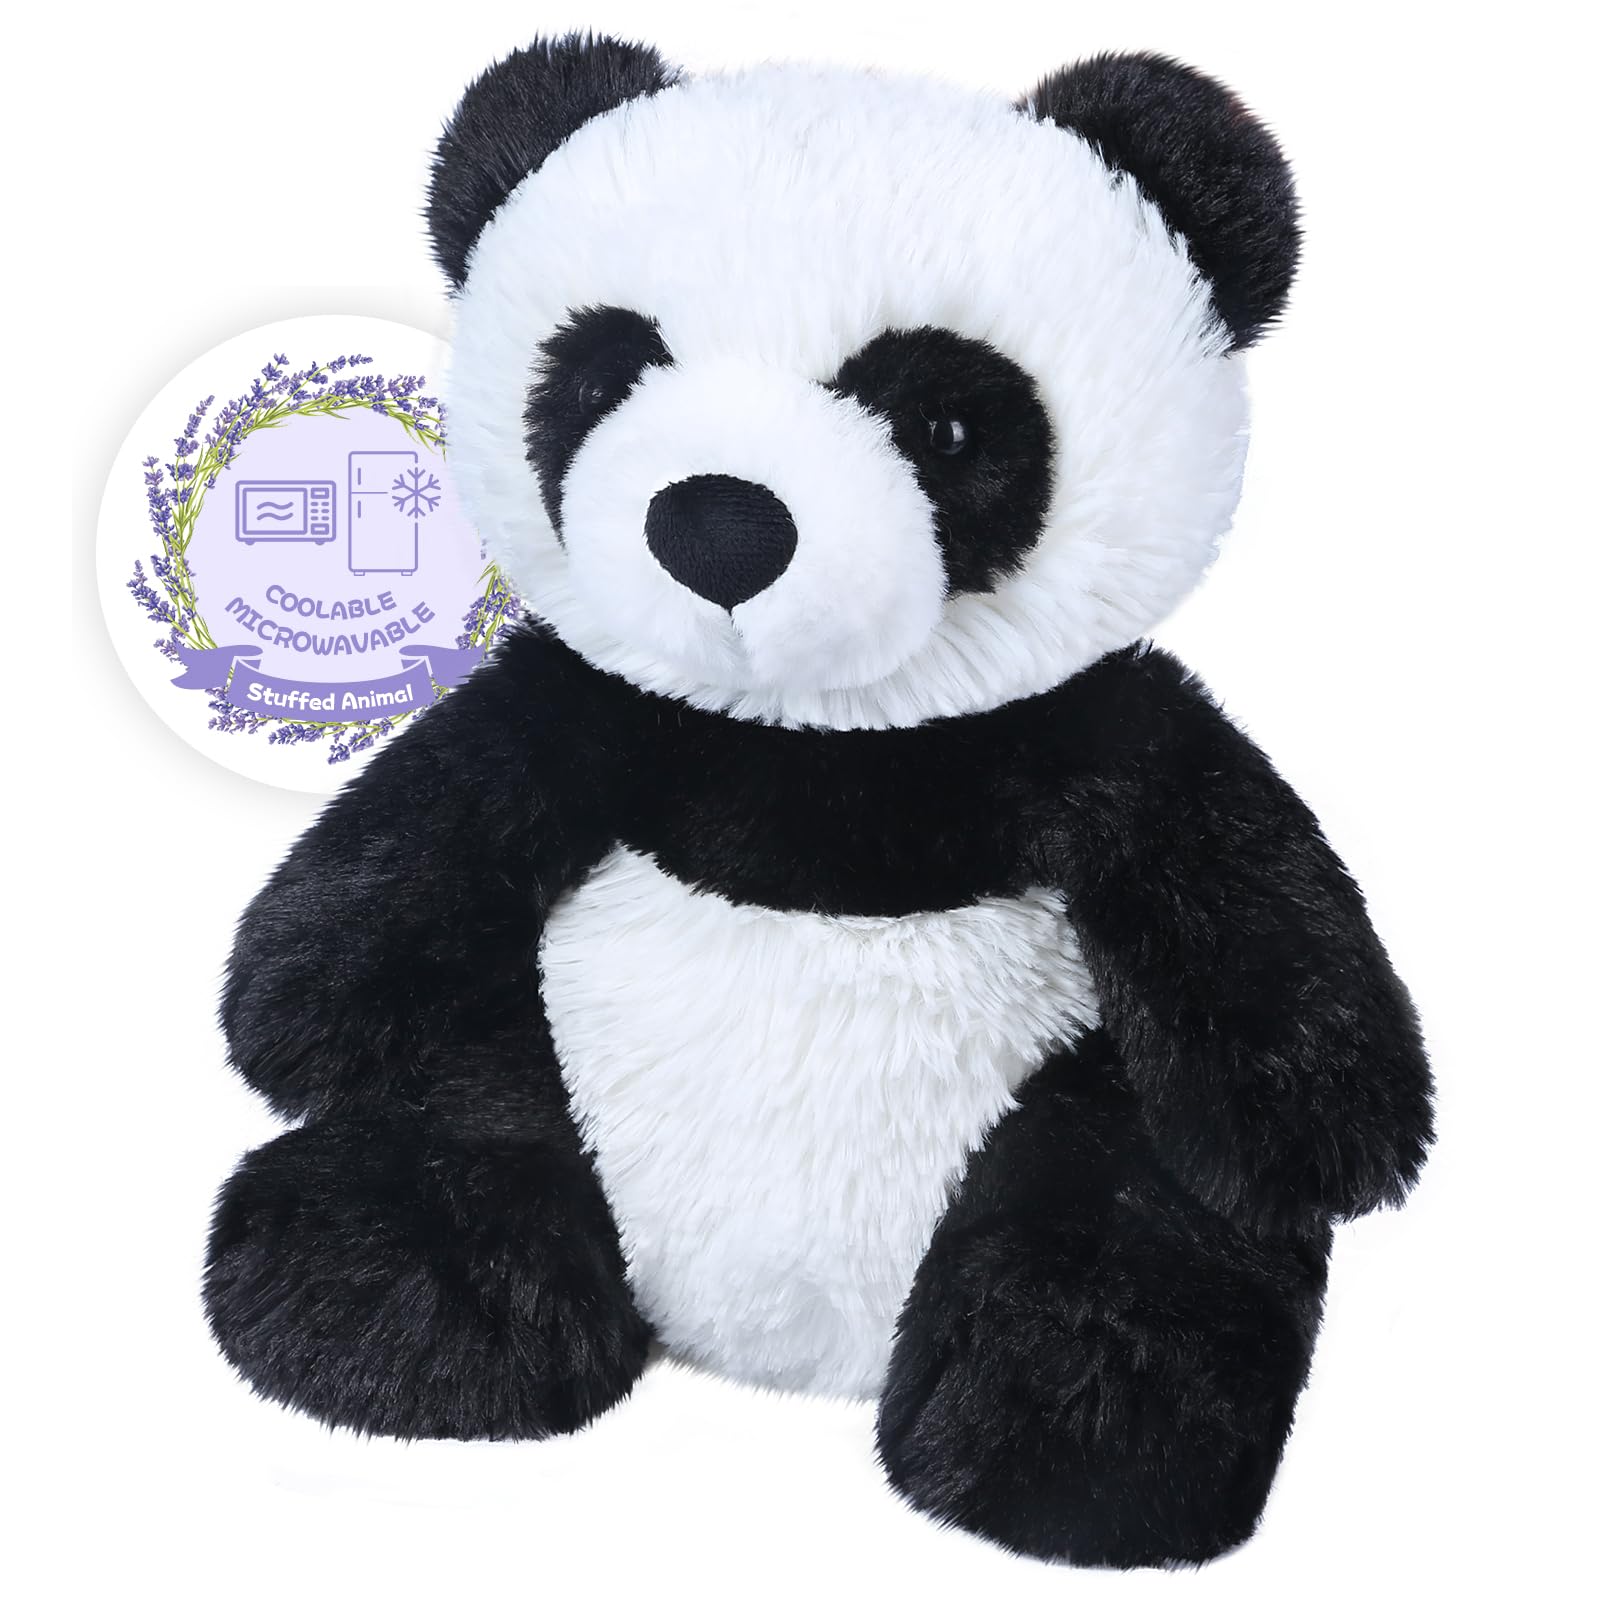 SuzziPals Warmable Panda Stuffed Animals, Microwave Heating Pads for Cramps, Anxiety & Stress Relief, Cuddly Panda Plushies with Lavender Scent, Heatable & Coolable Stuffed Panda Bear, Panda Gifts